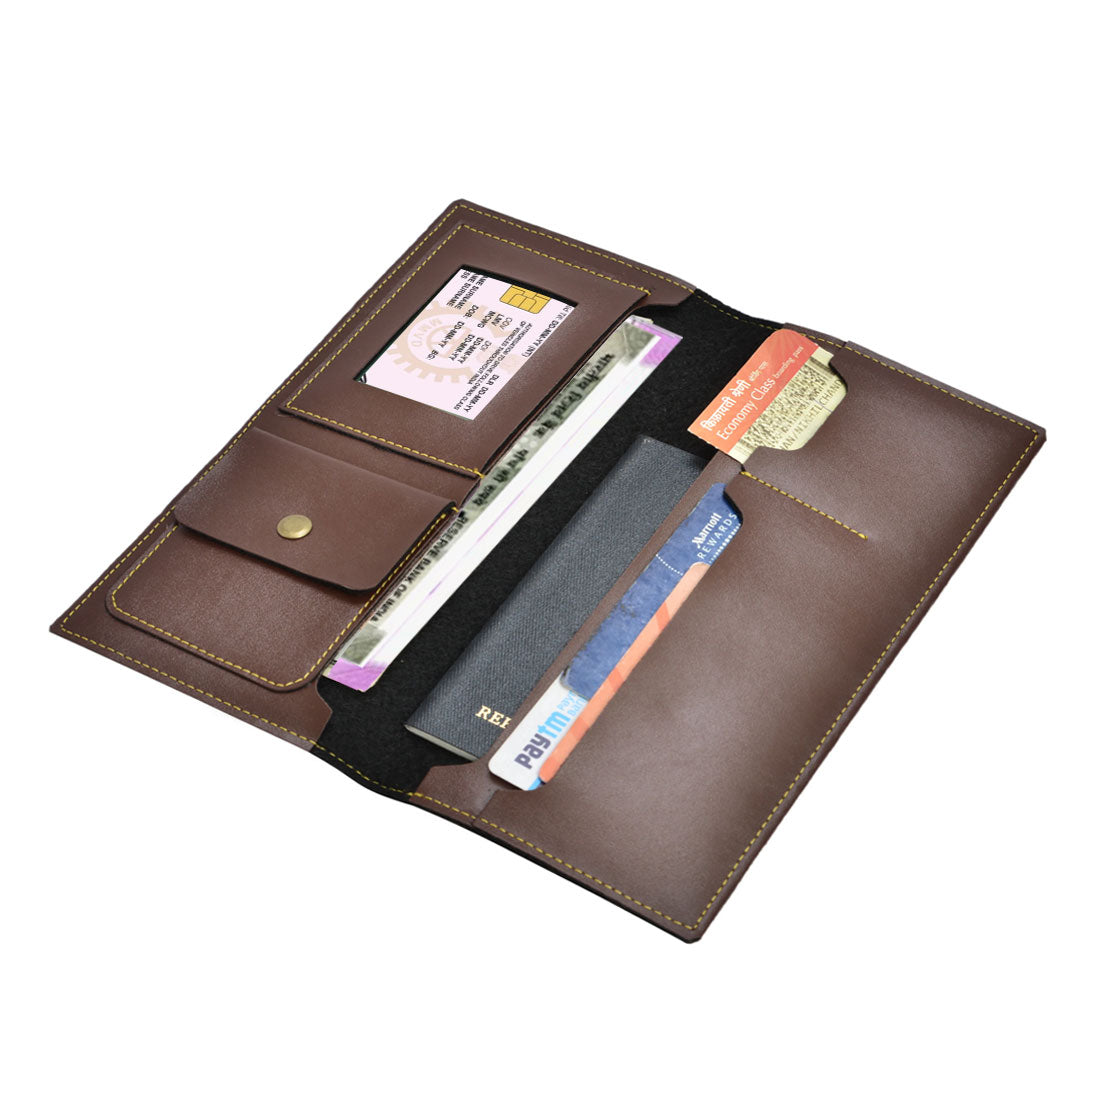 Polare Full Grain Leather Family Travel Passport Wallet and Documents  Organizer RFID Blocking Case Holder Fits 6 Passports, Black, Retro :  Amazon.in: Bags, Wallets and Luggage